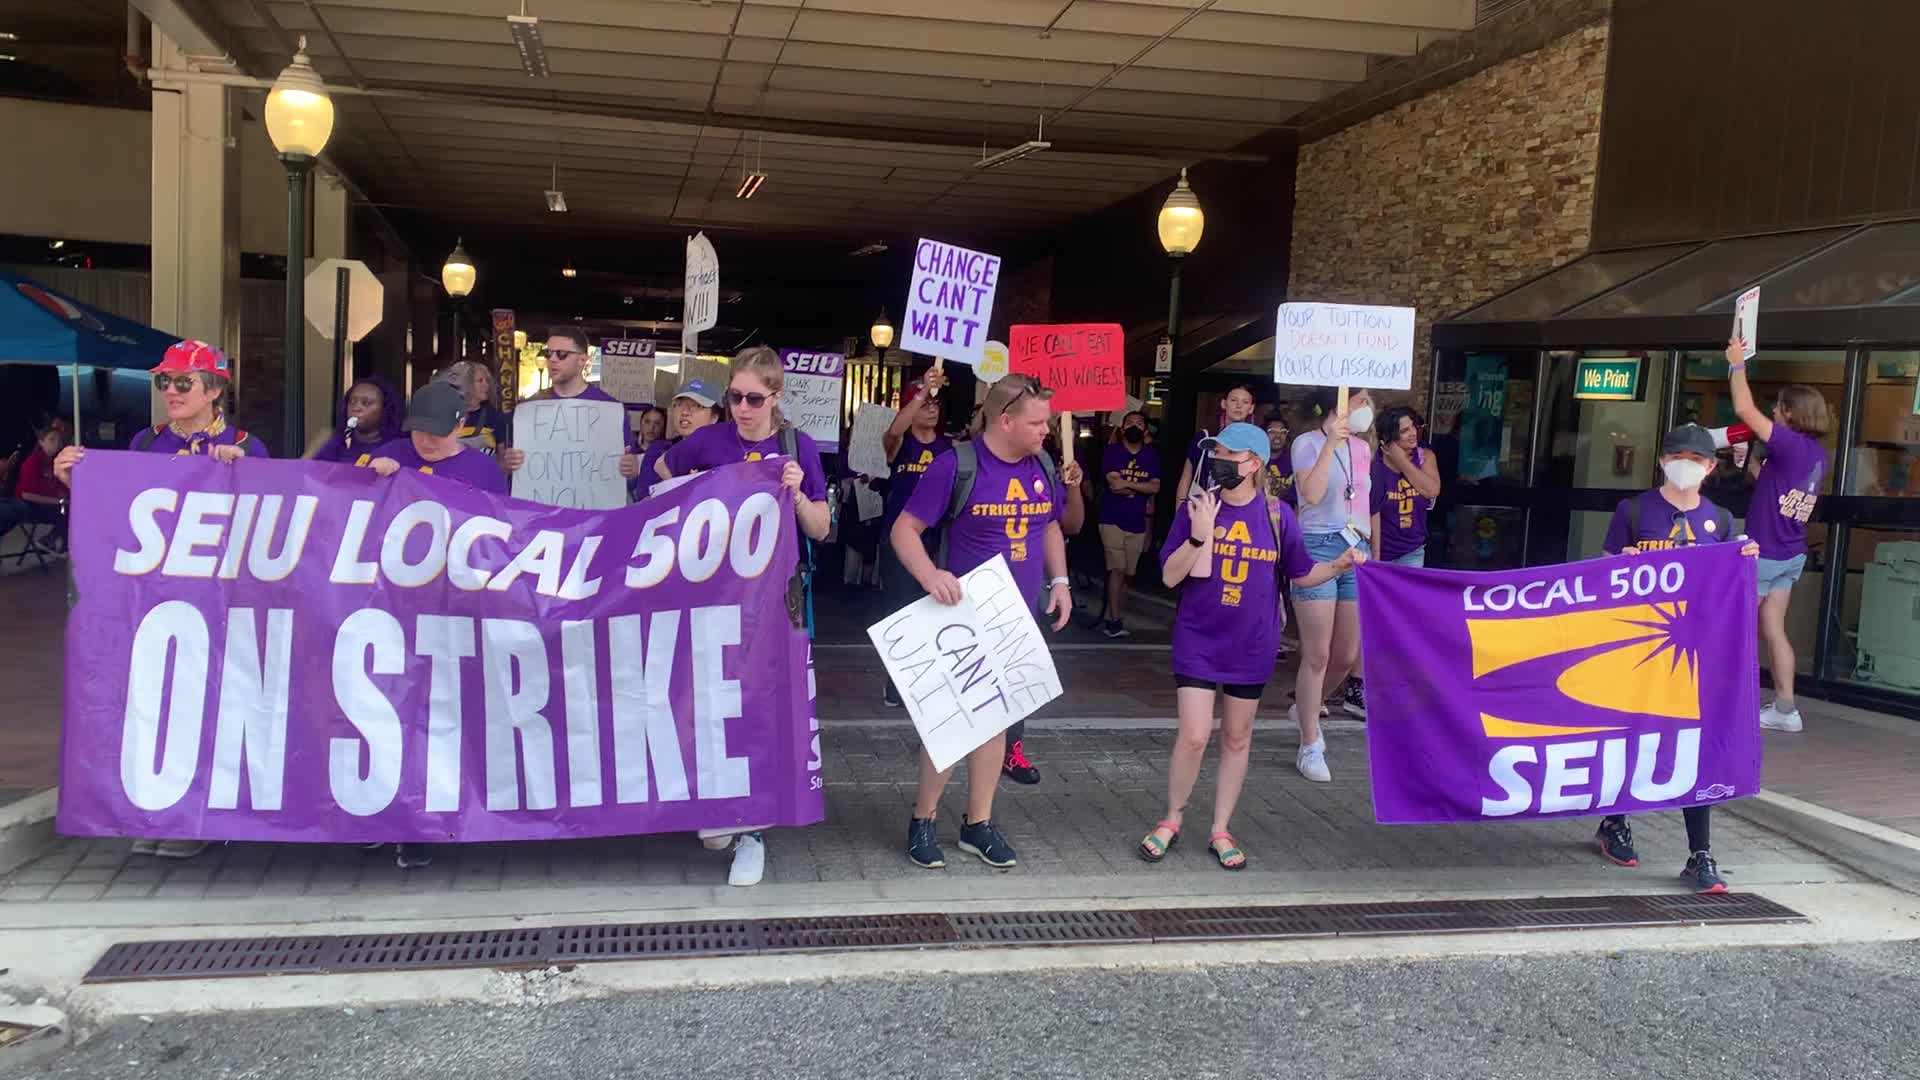 Video of the Strike (35)